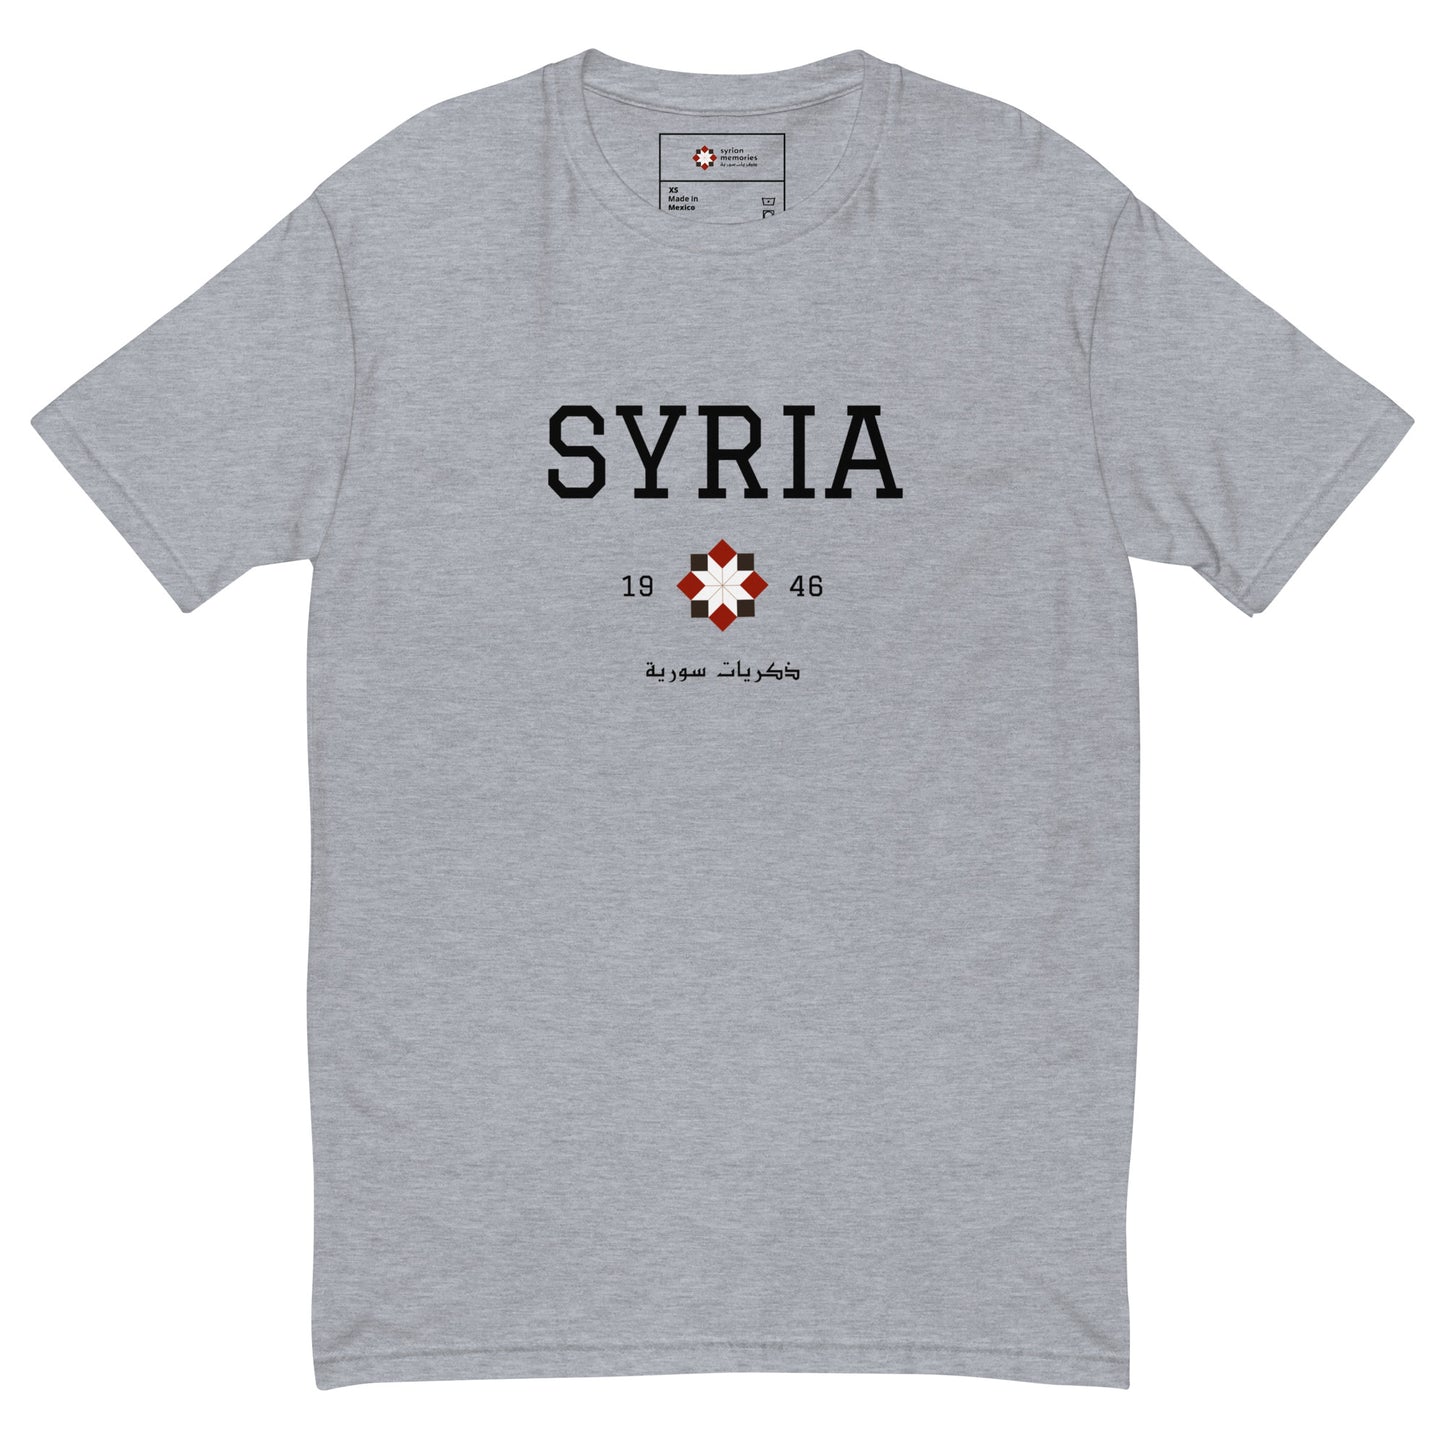 Syria - University Collection - Cotton T-shirt